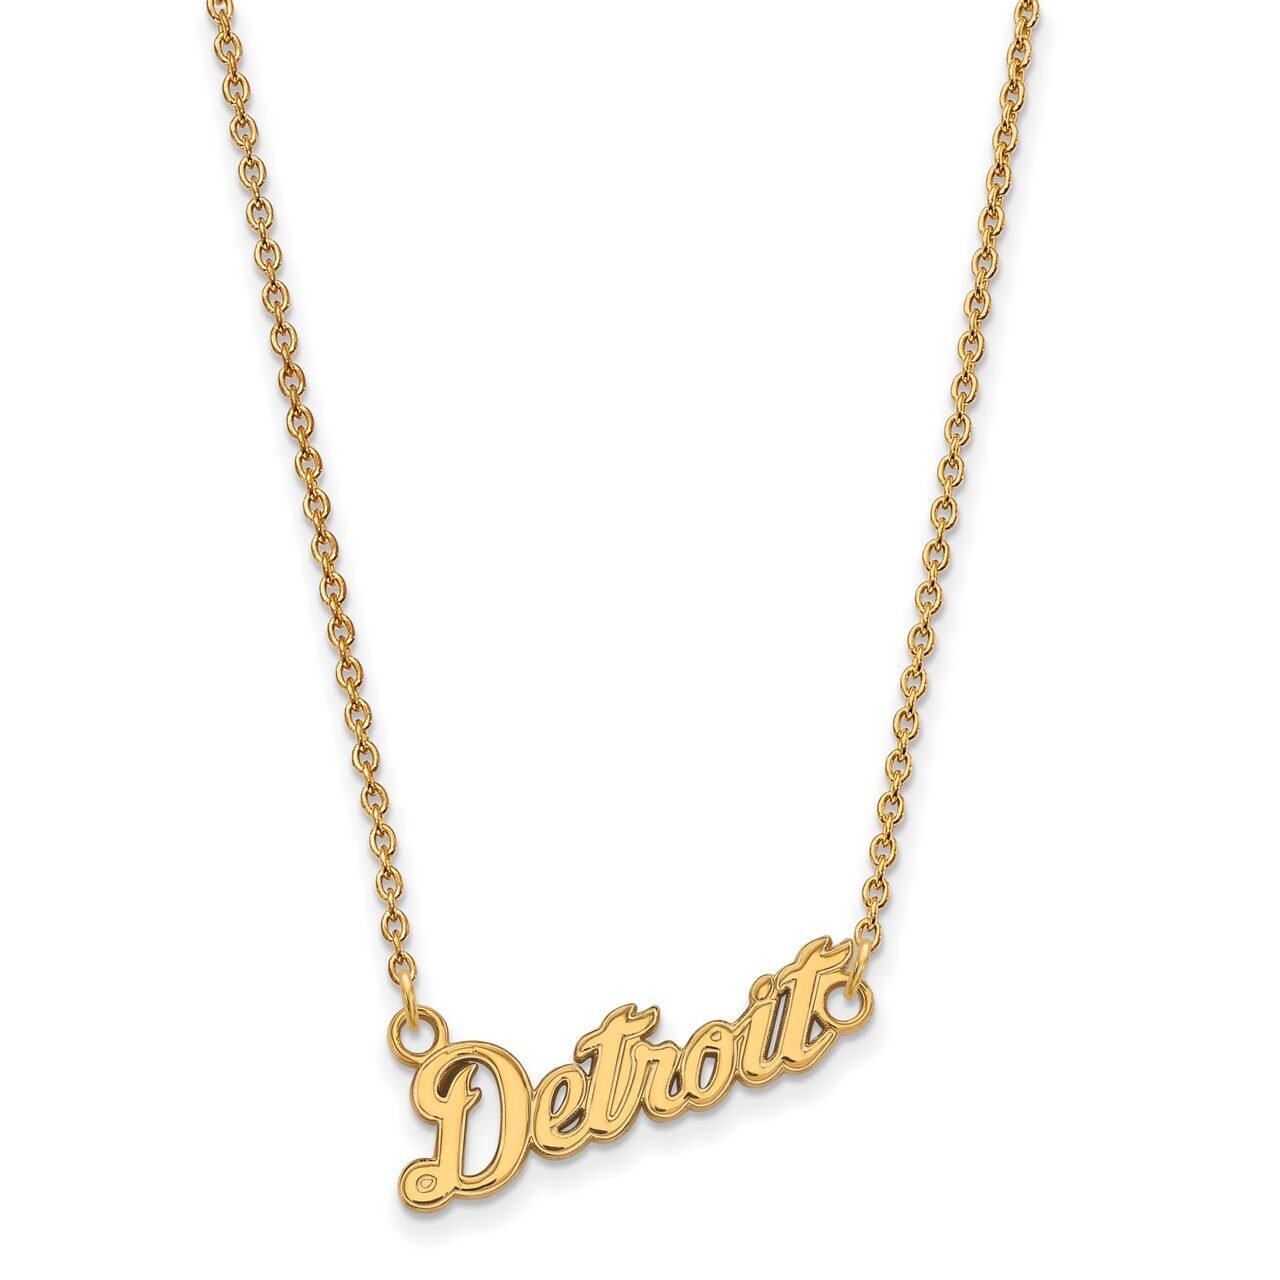 Detroit Tigers Small Pendant with Chain Necklace 14k Yellow Gold 4Y061TIG-18